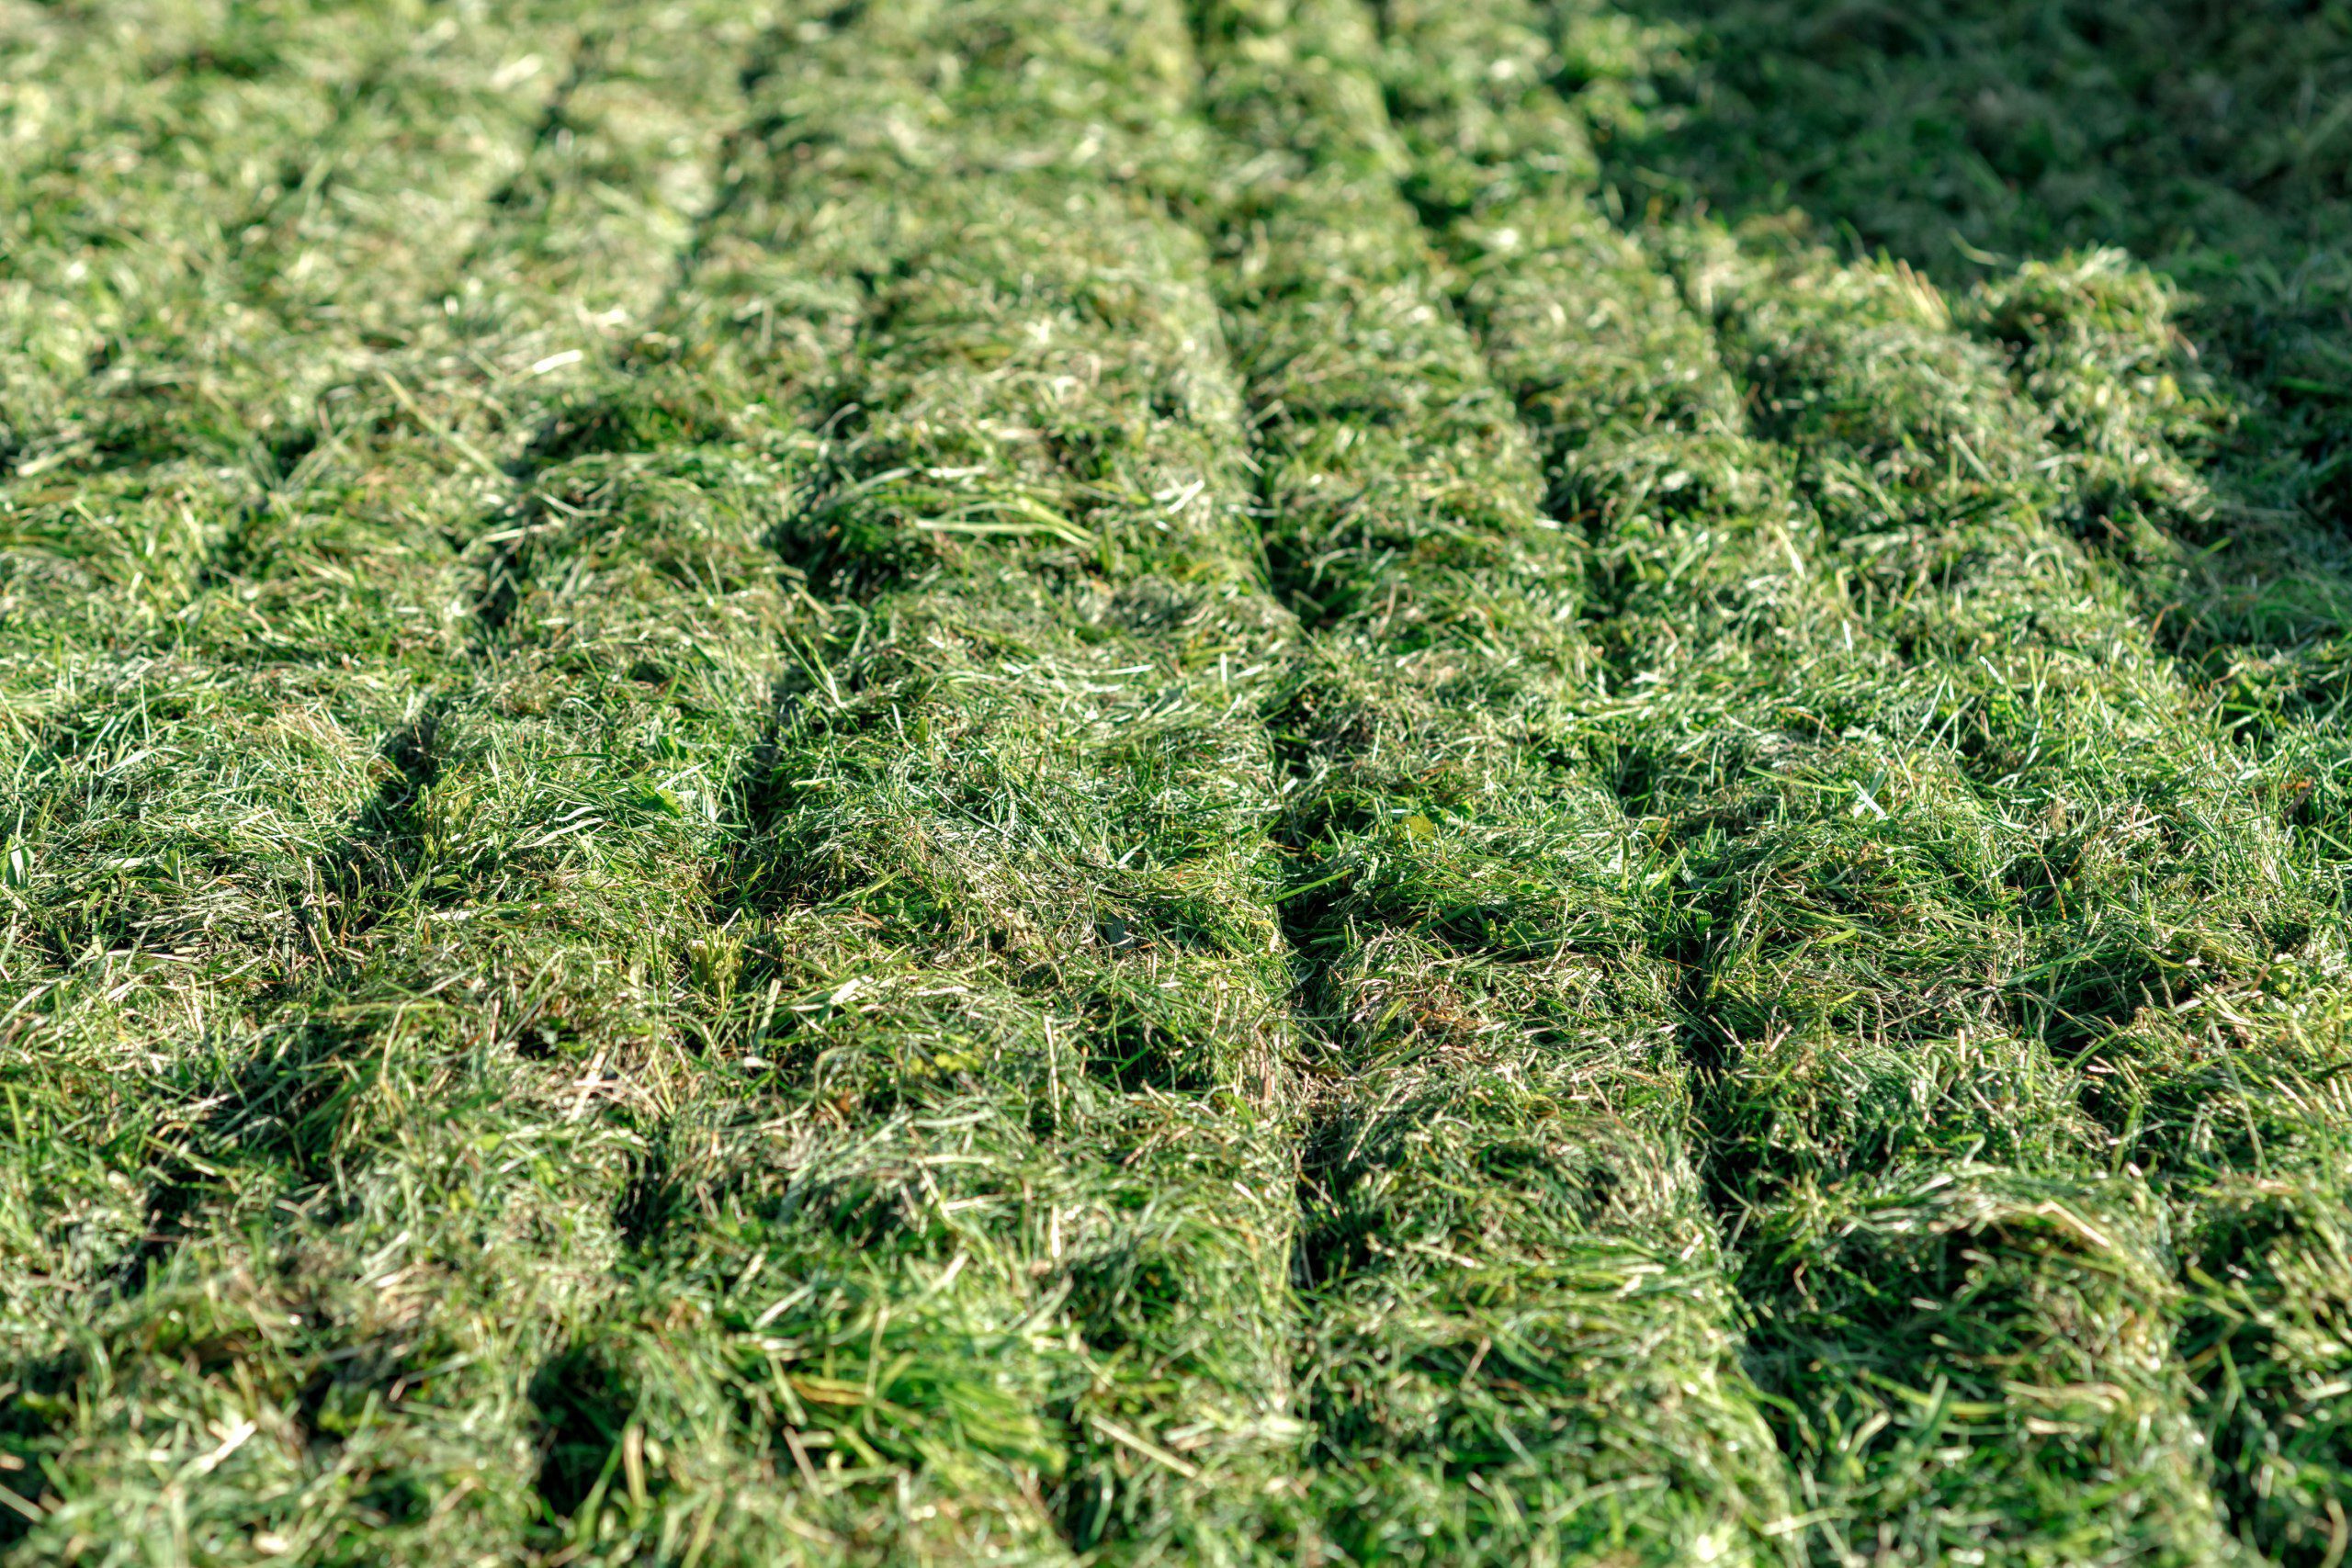 Good compaction assures silage quality